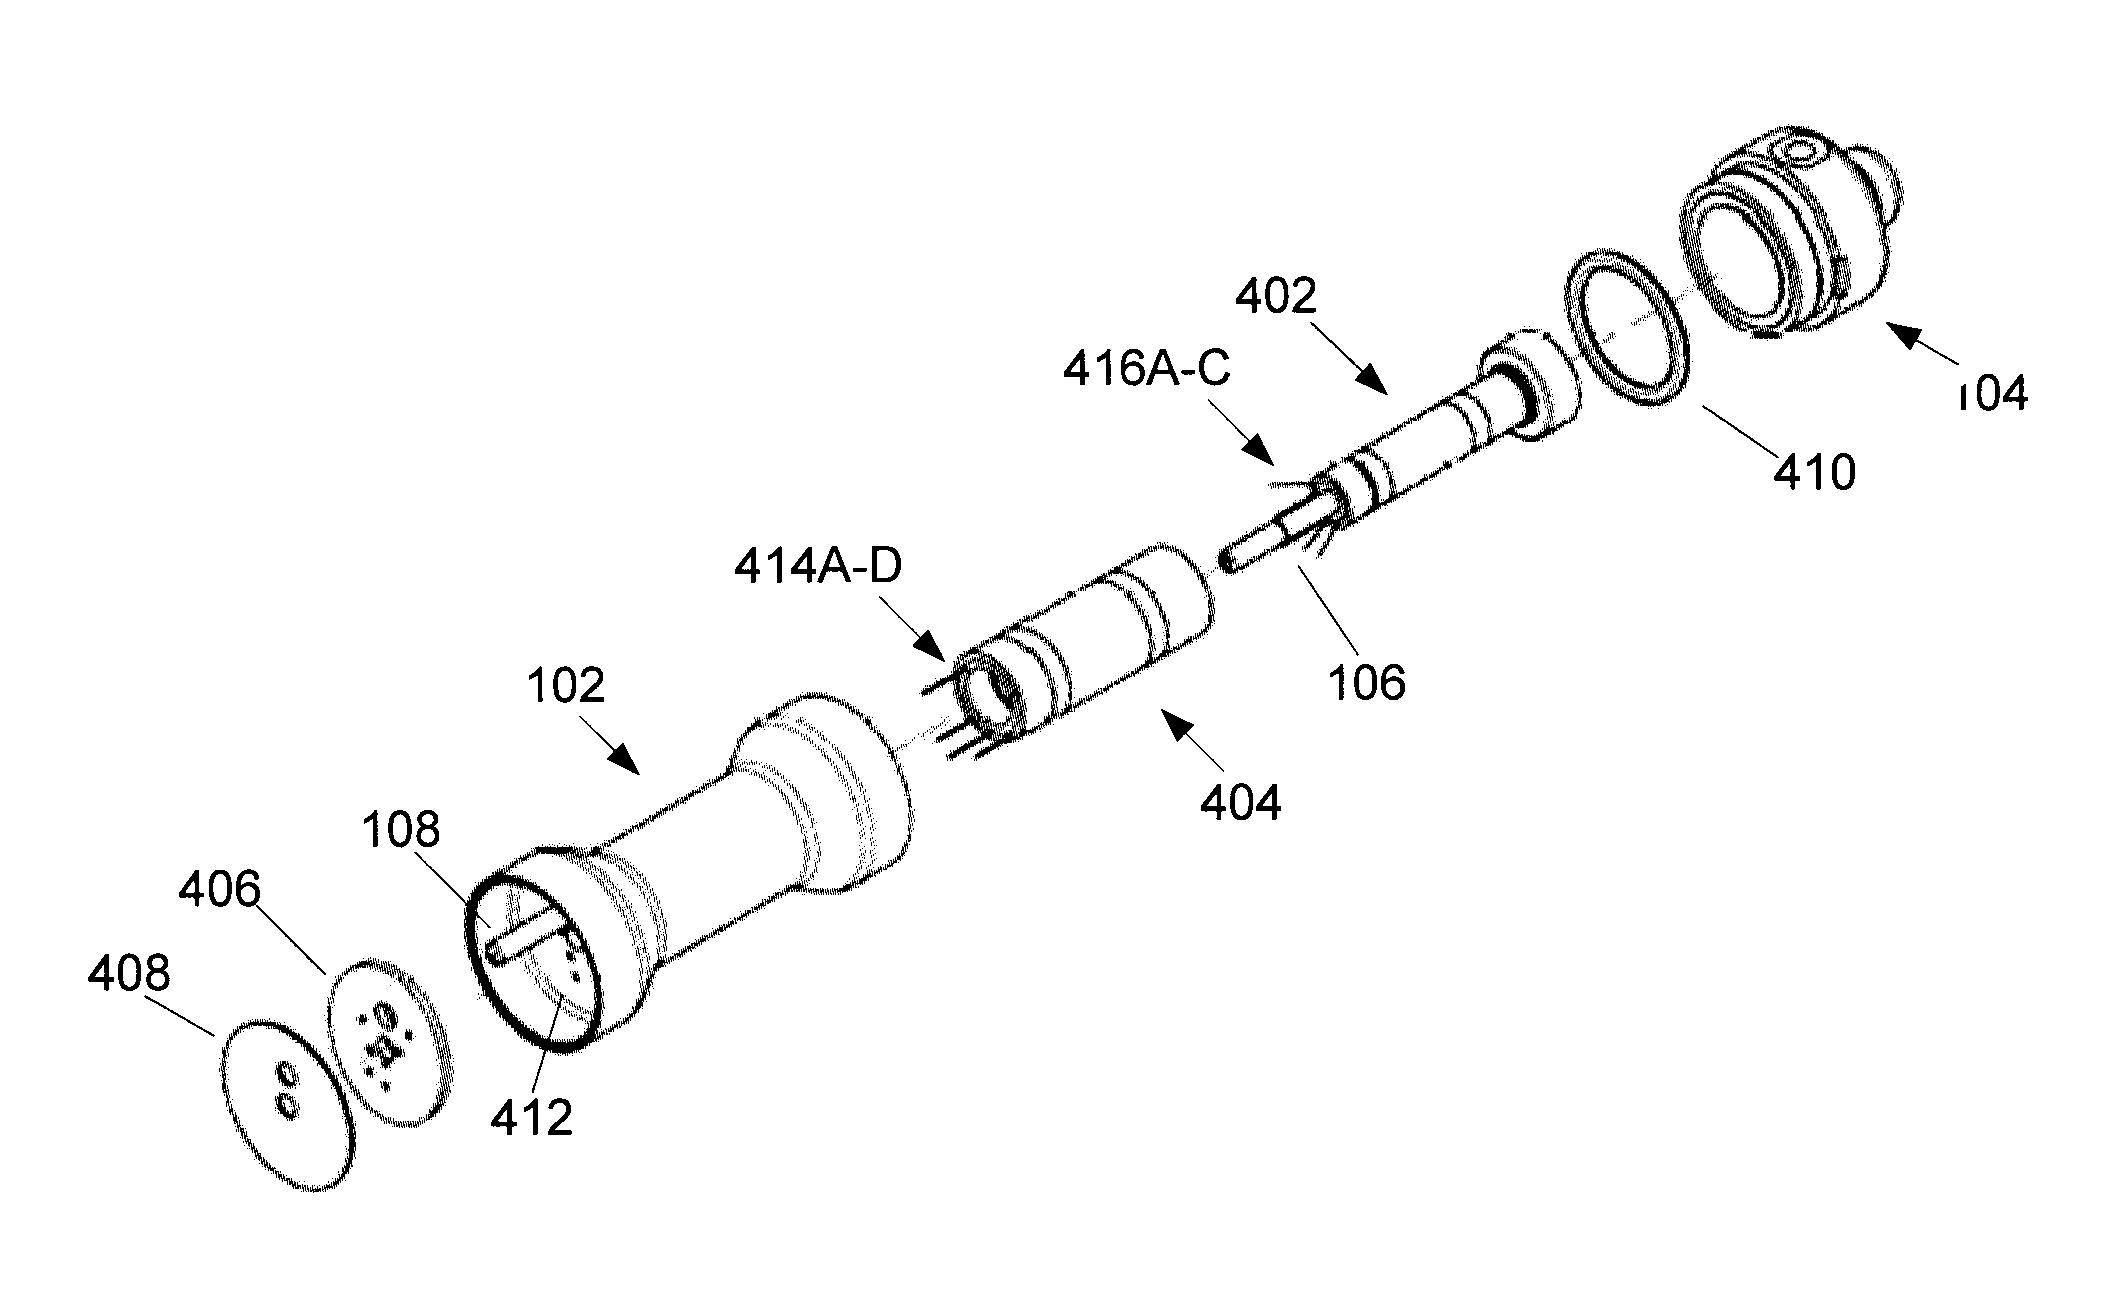 Method and System for Detecting Vapors